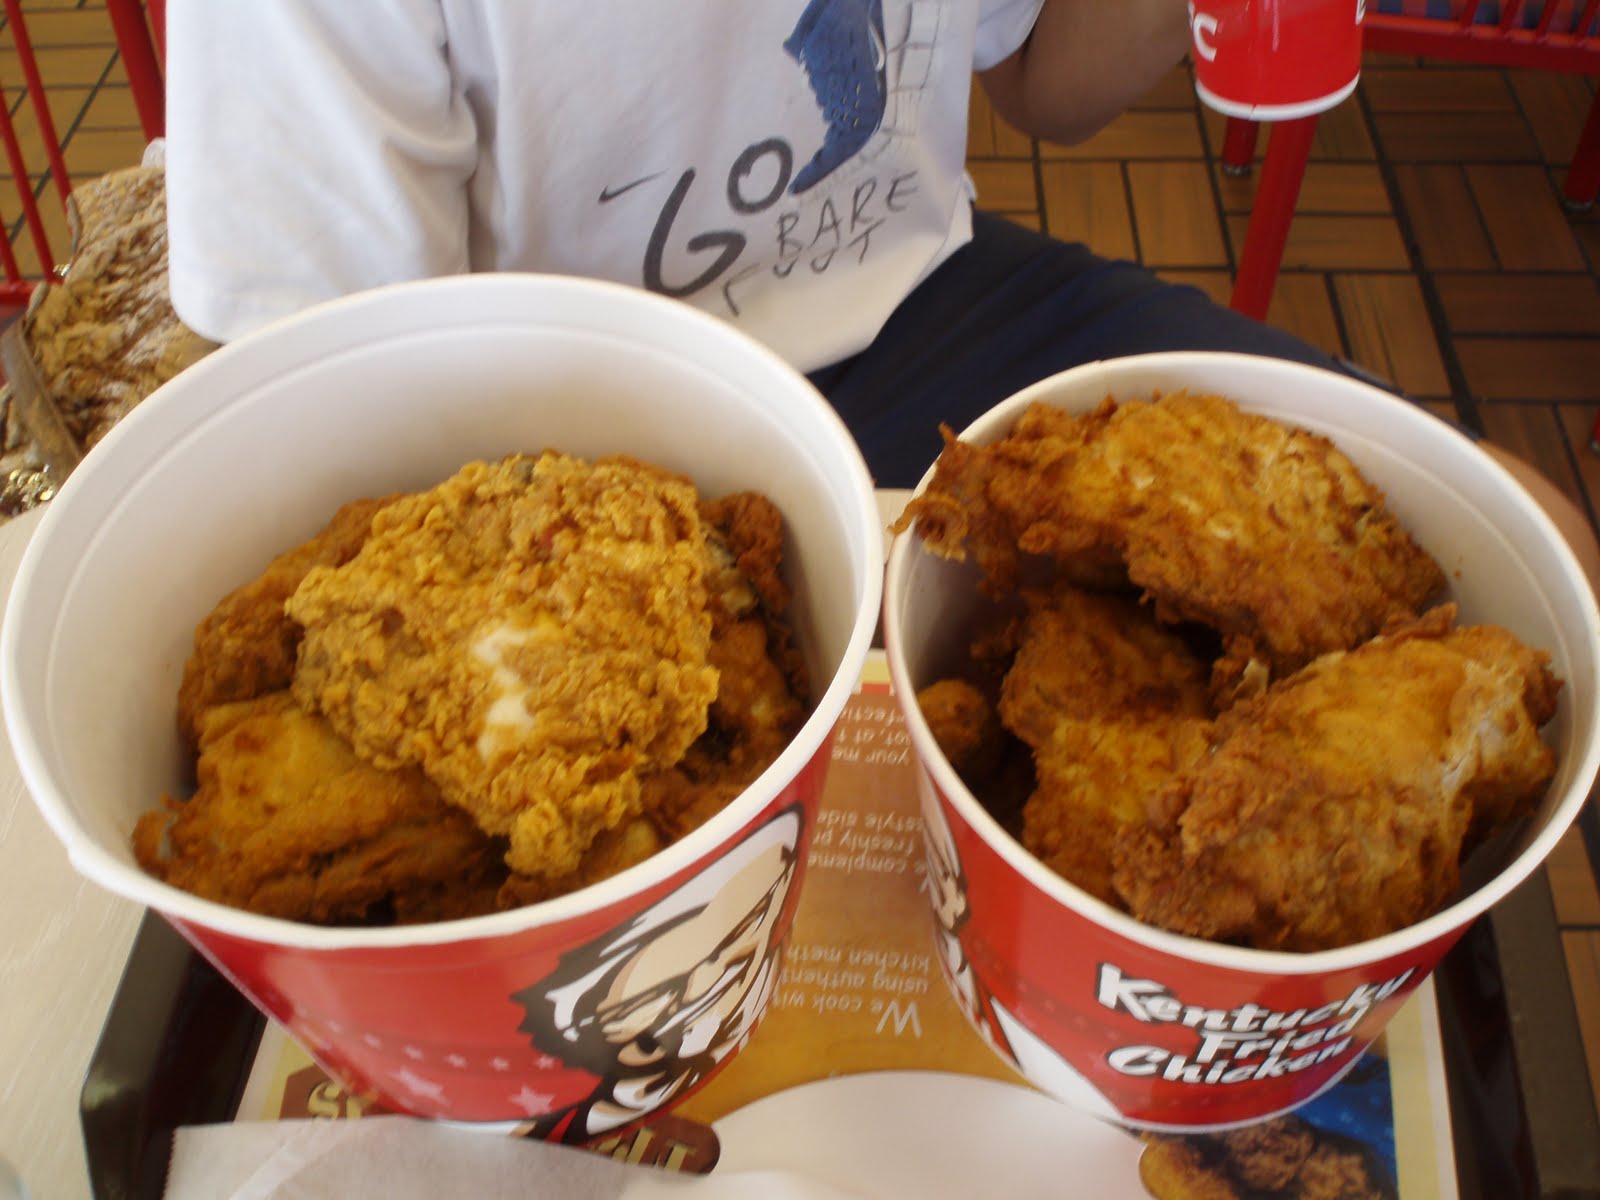 Be happy with all the lil' things that make you happy! :): our KFC meal